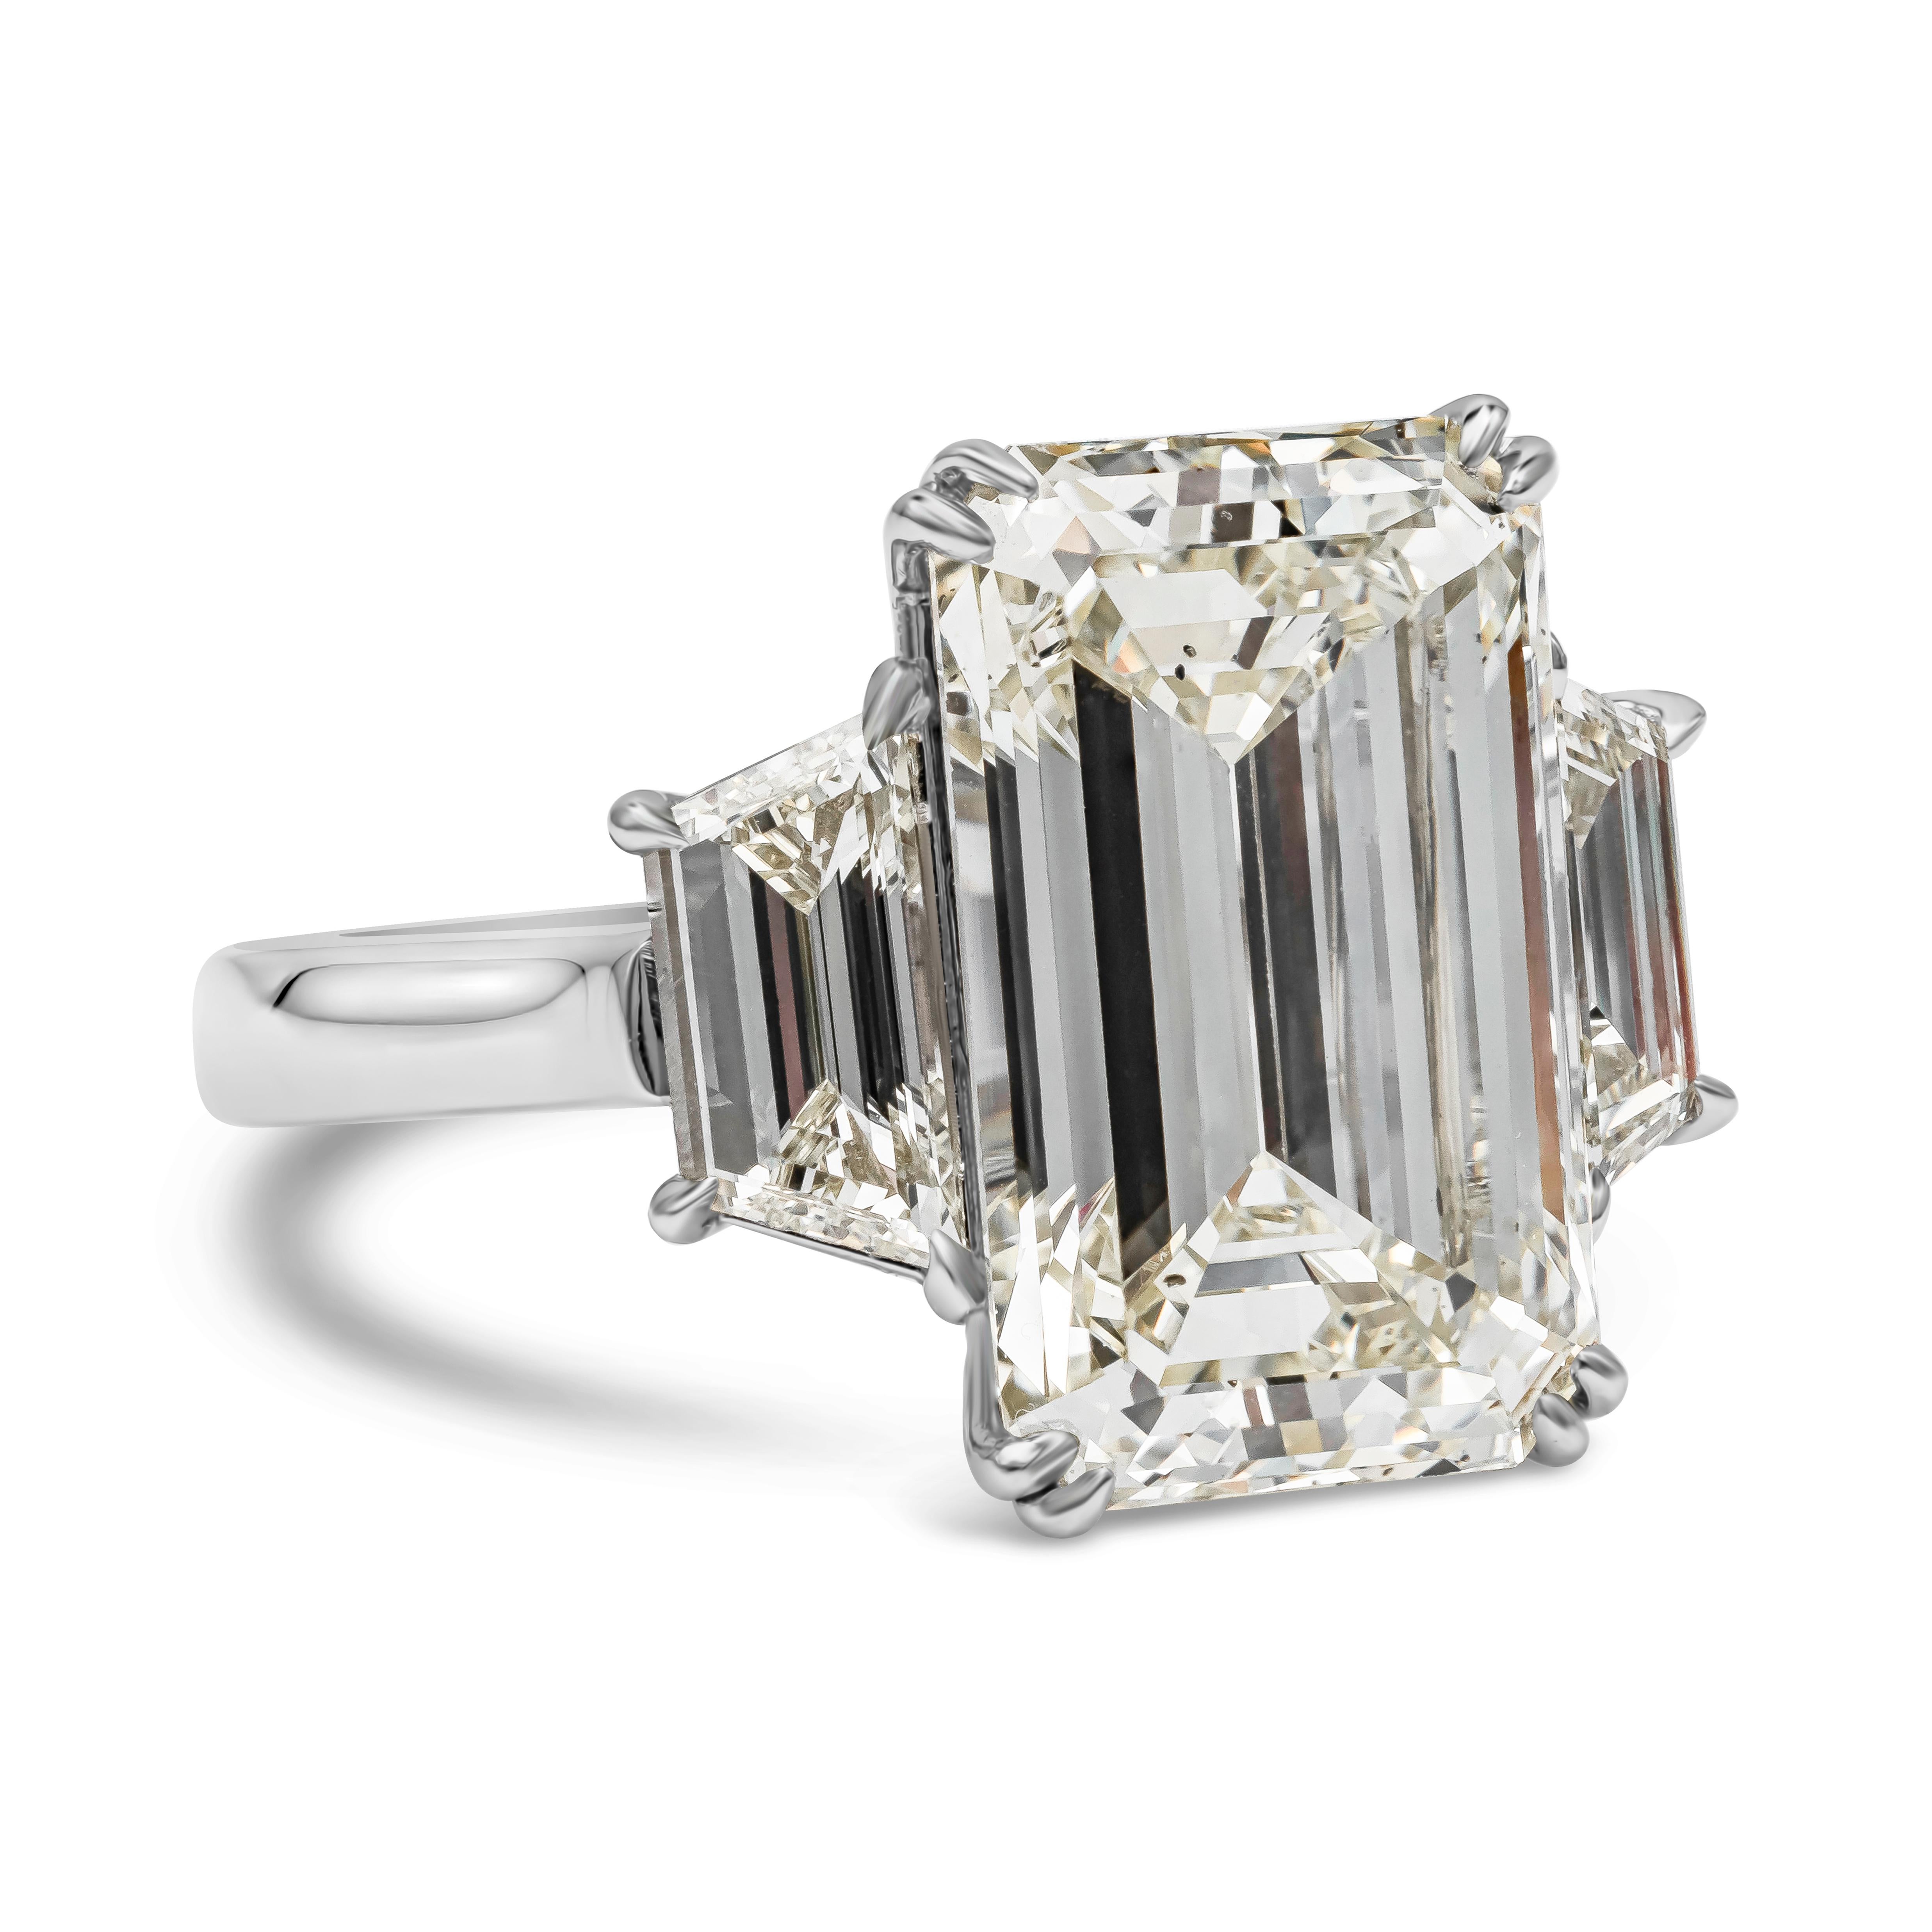 GIA Certified 8.96 carat emerald cut diamond center stone, O Color and SI in Clarity. Accented by a trapezoid diamond side stone on each side, weighing 1.40 carats total. Made with Platinum. Size 6.5 US

Style available in different price ranges.